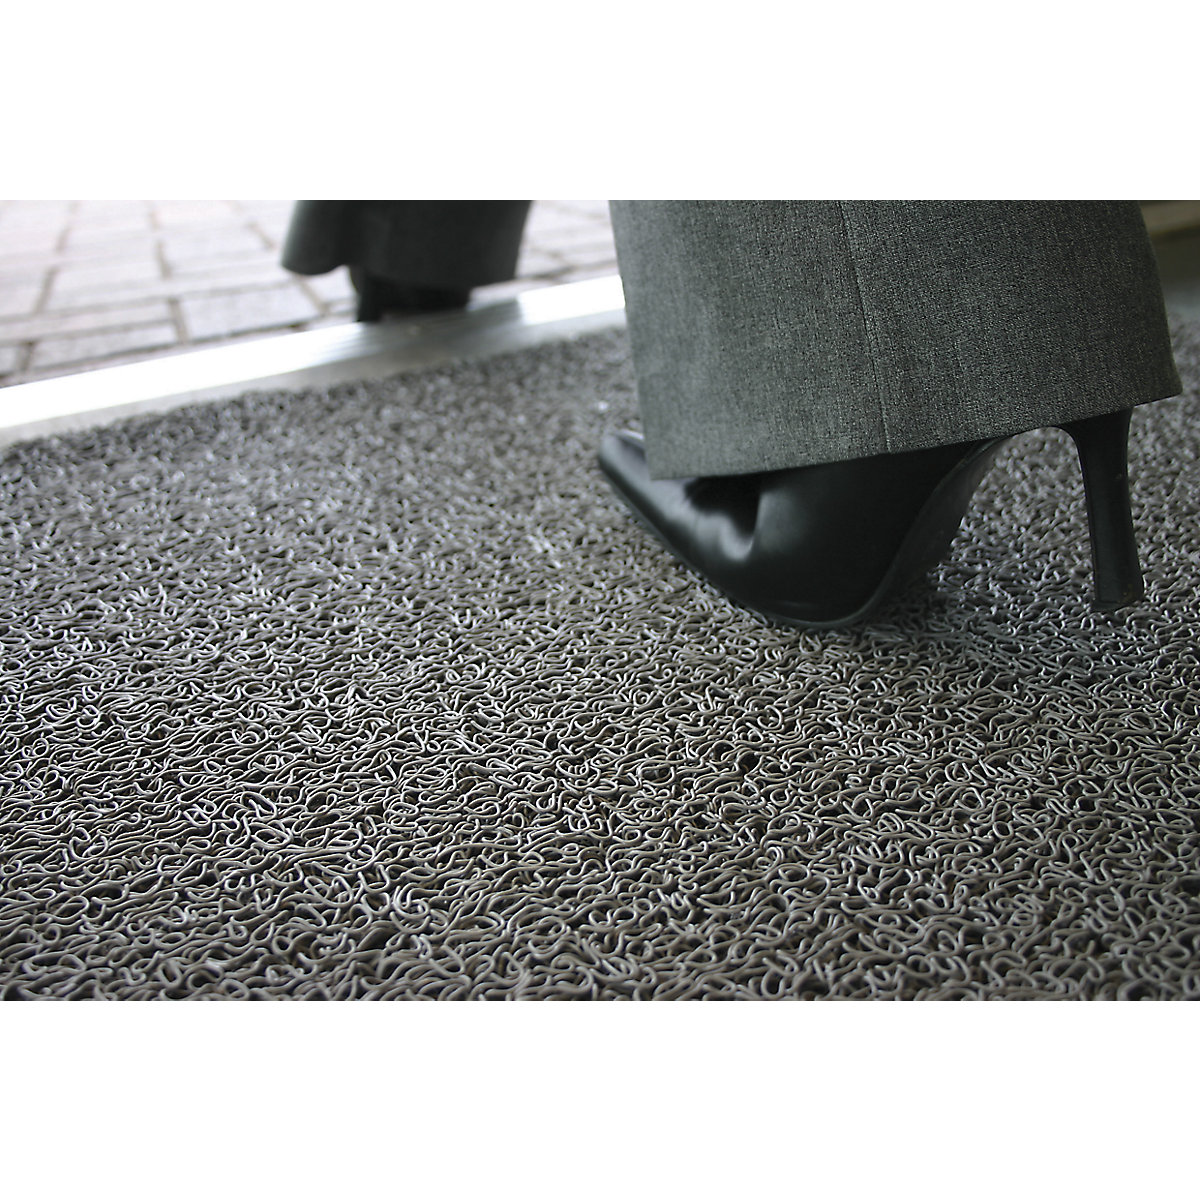 Entrance matting, flame resistant – COBA, LxW 1200 x 900 mm, grey